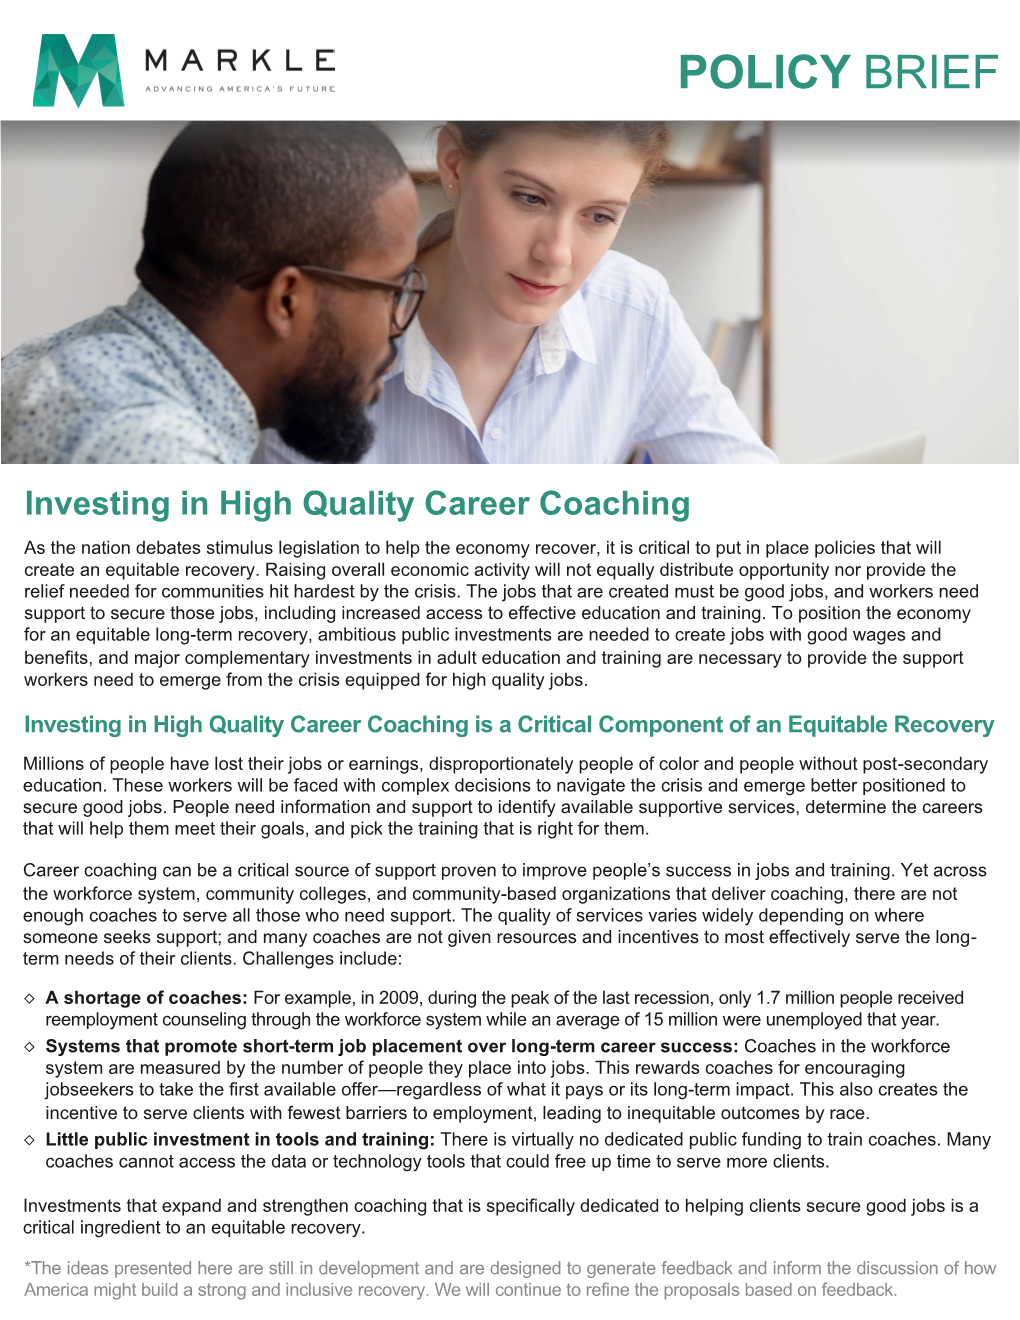 Career Coaching As the Nation Debates Stimulus Legislation to Help the Economy Recover, It Is Critical to Put in Place Policies That Will Create an Equitable Recovery